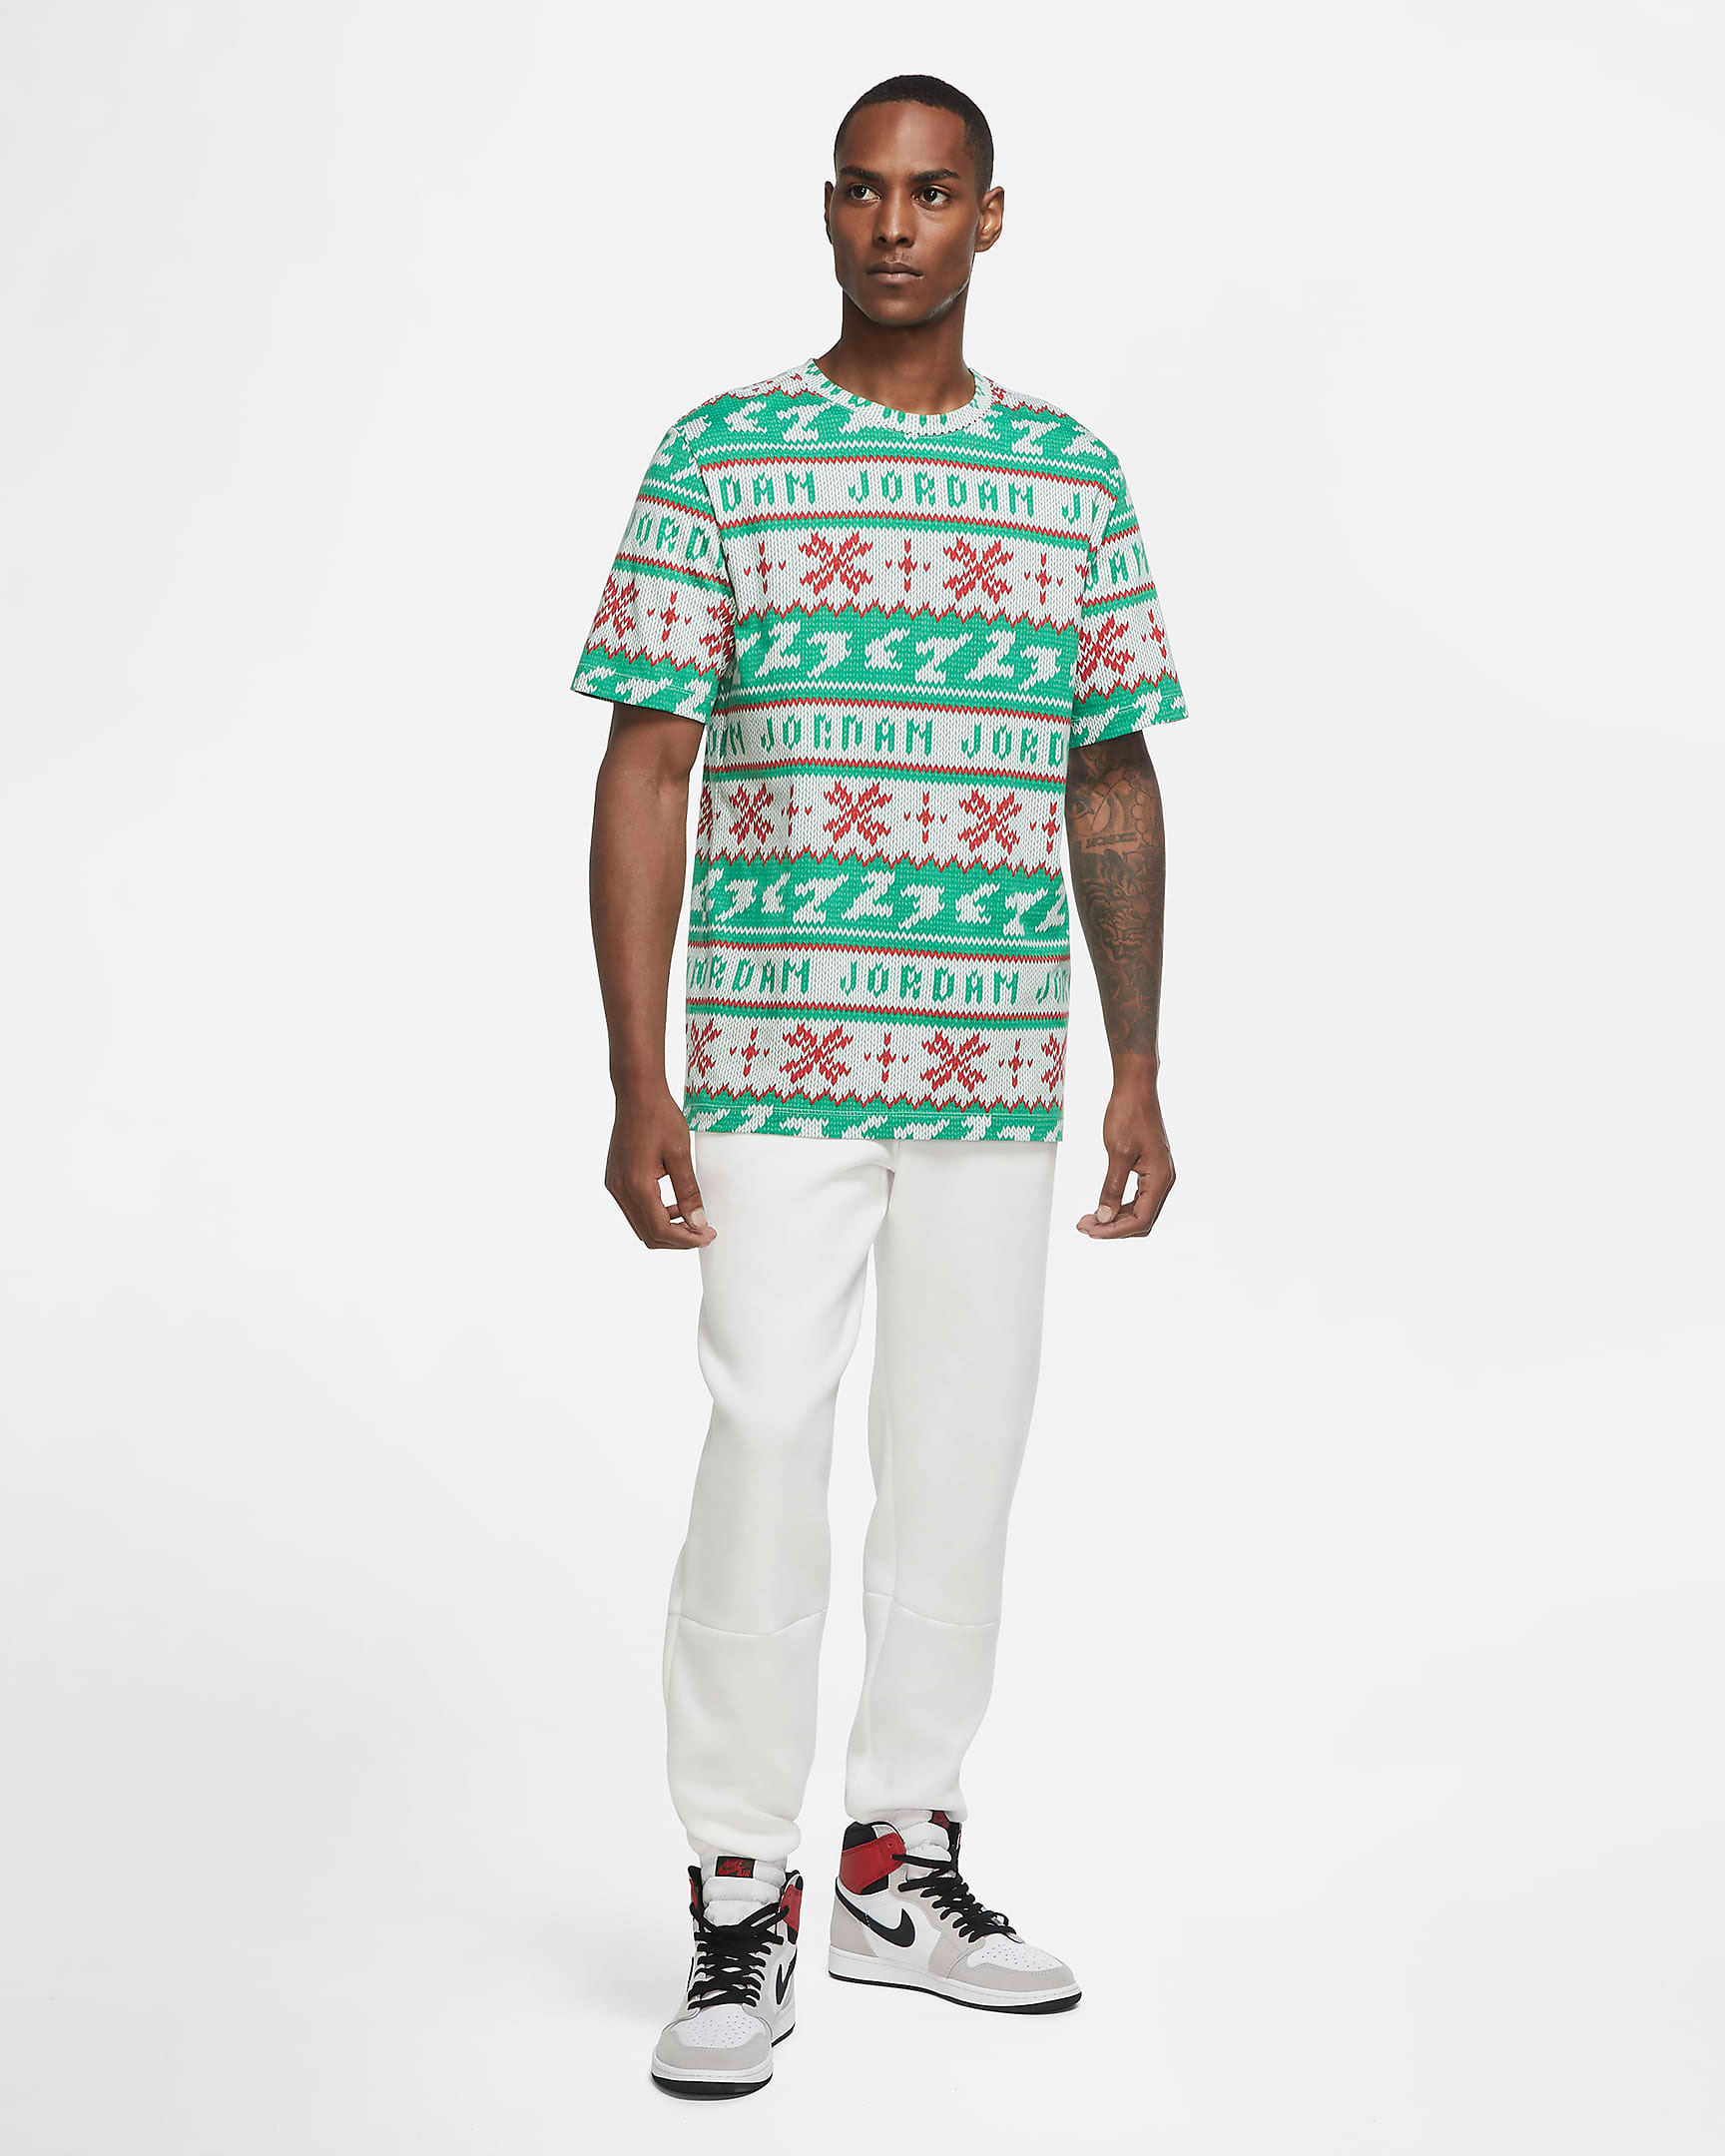 jordan-holiday-ugly-sweater-shirt-green-red-white-4